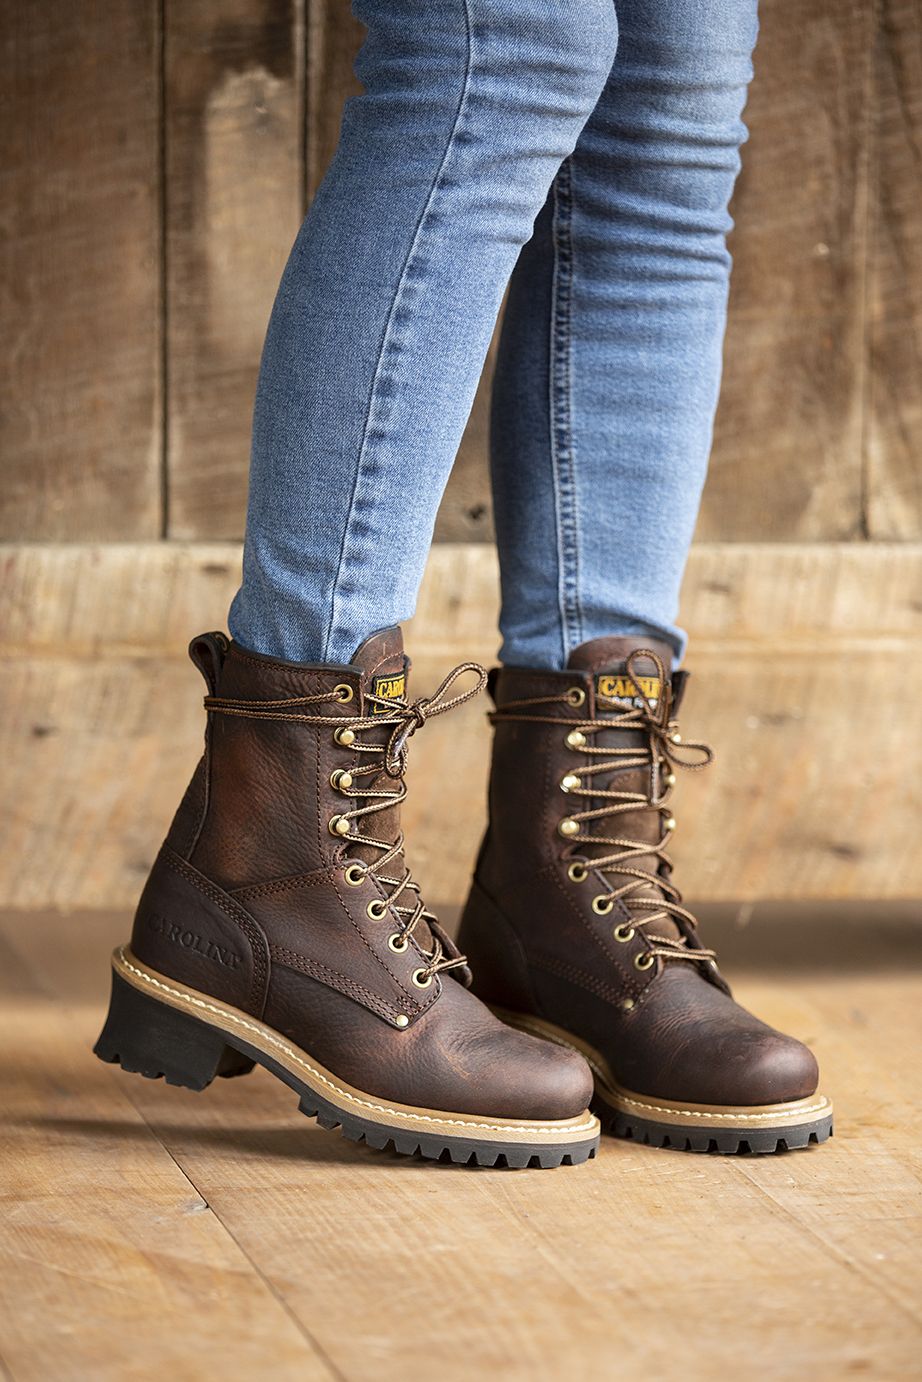 Work Boots For Women To Keep Them Safe
  Looks Stylish